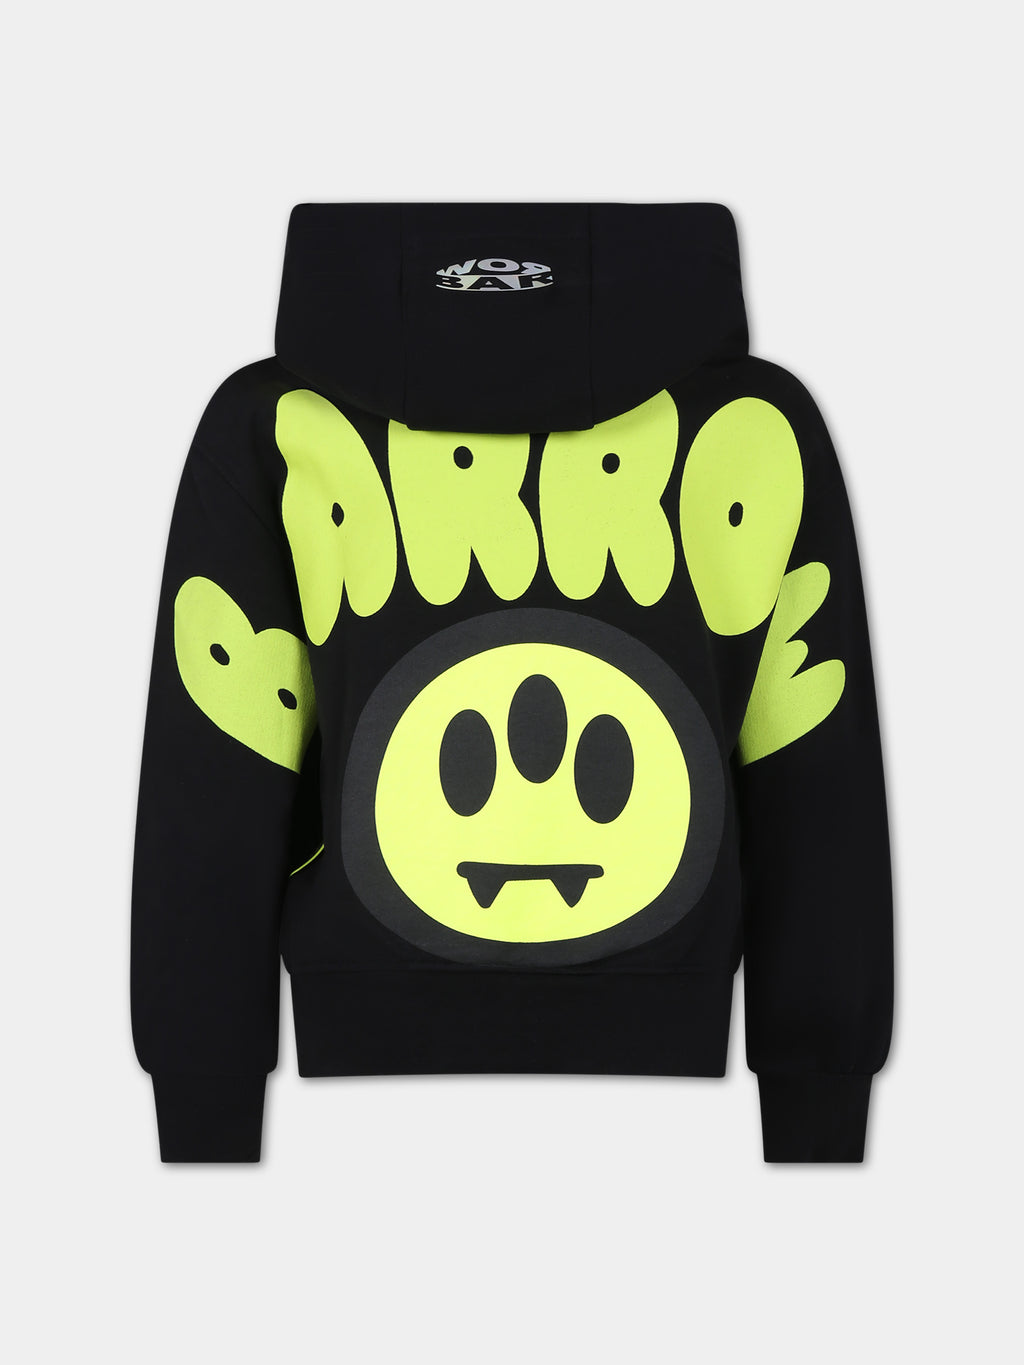 Black sweatshirt for kids with logo and iconic smiley face